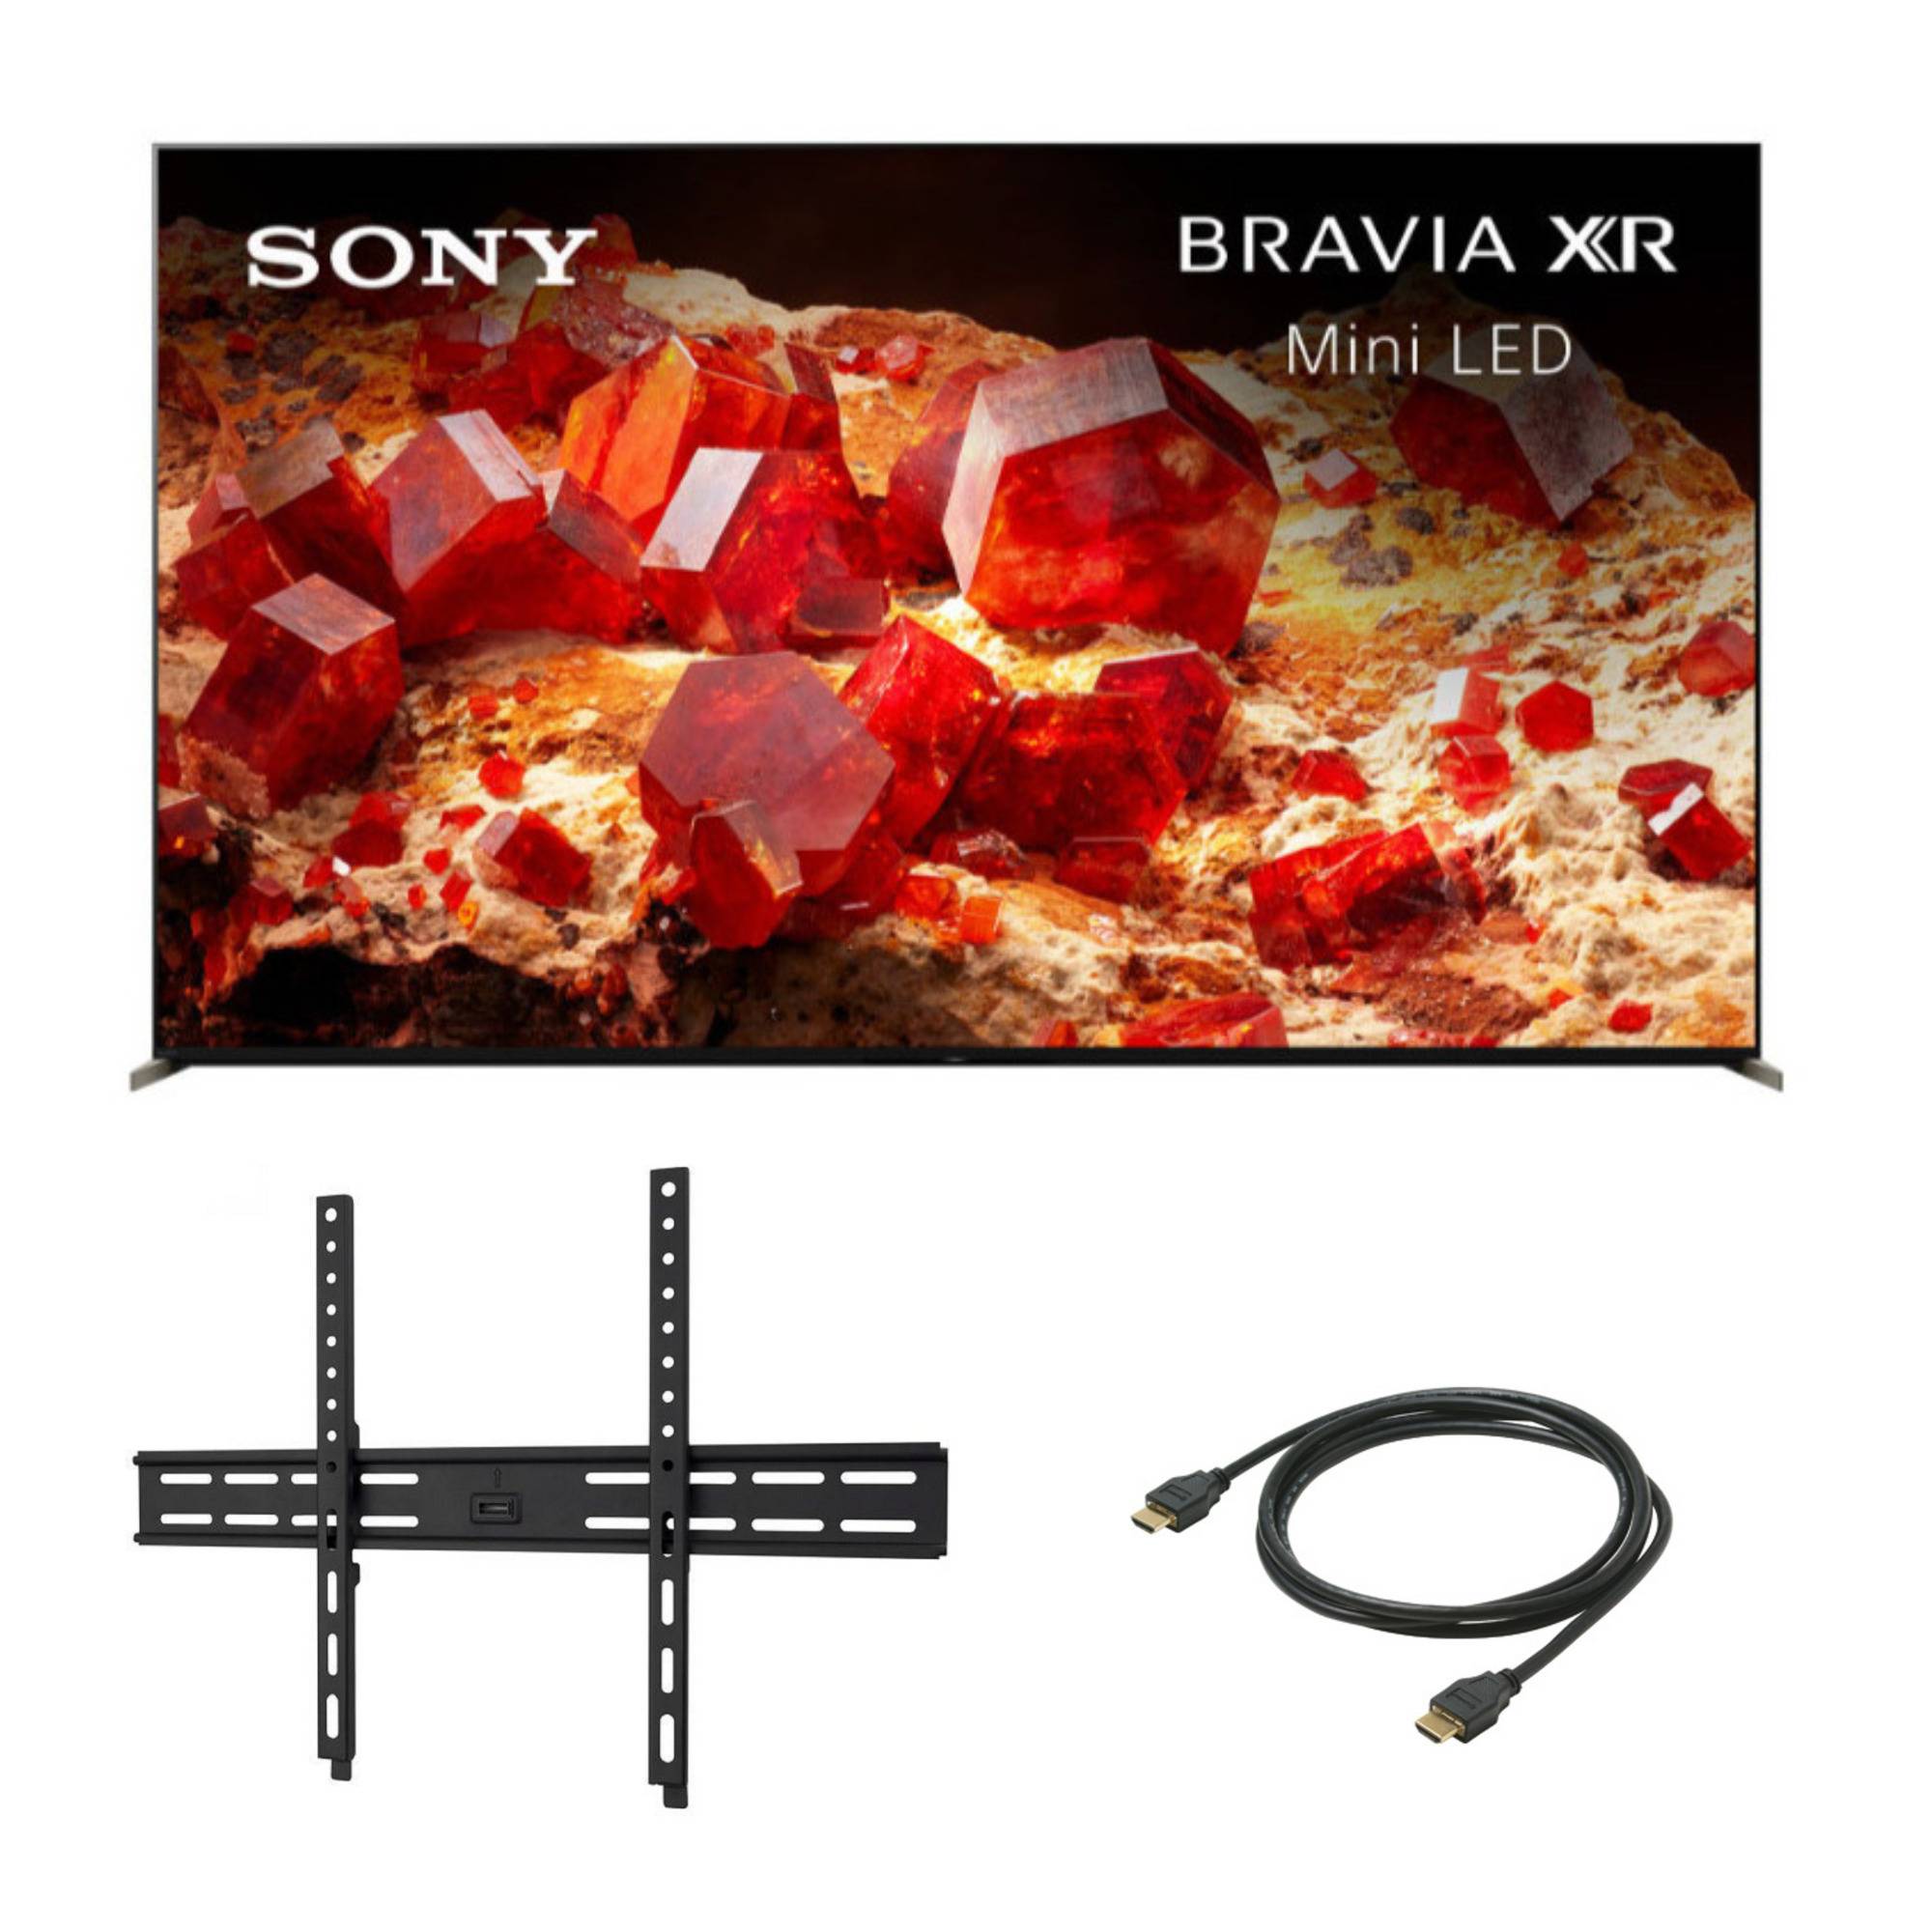 Sony BRAVIA XR 85” Class X93L Mini LED 4K HDR TV (2023 Model) with Wall Mount and HDMI Cable